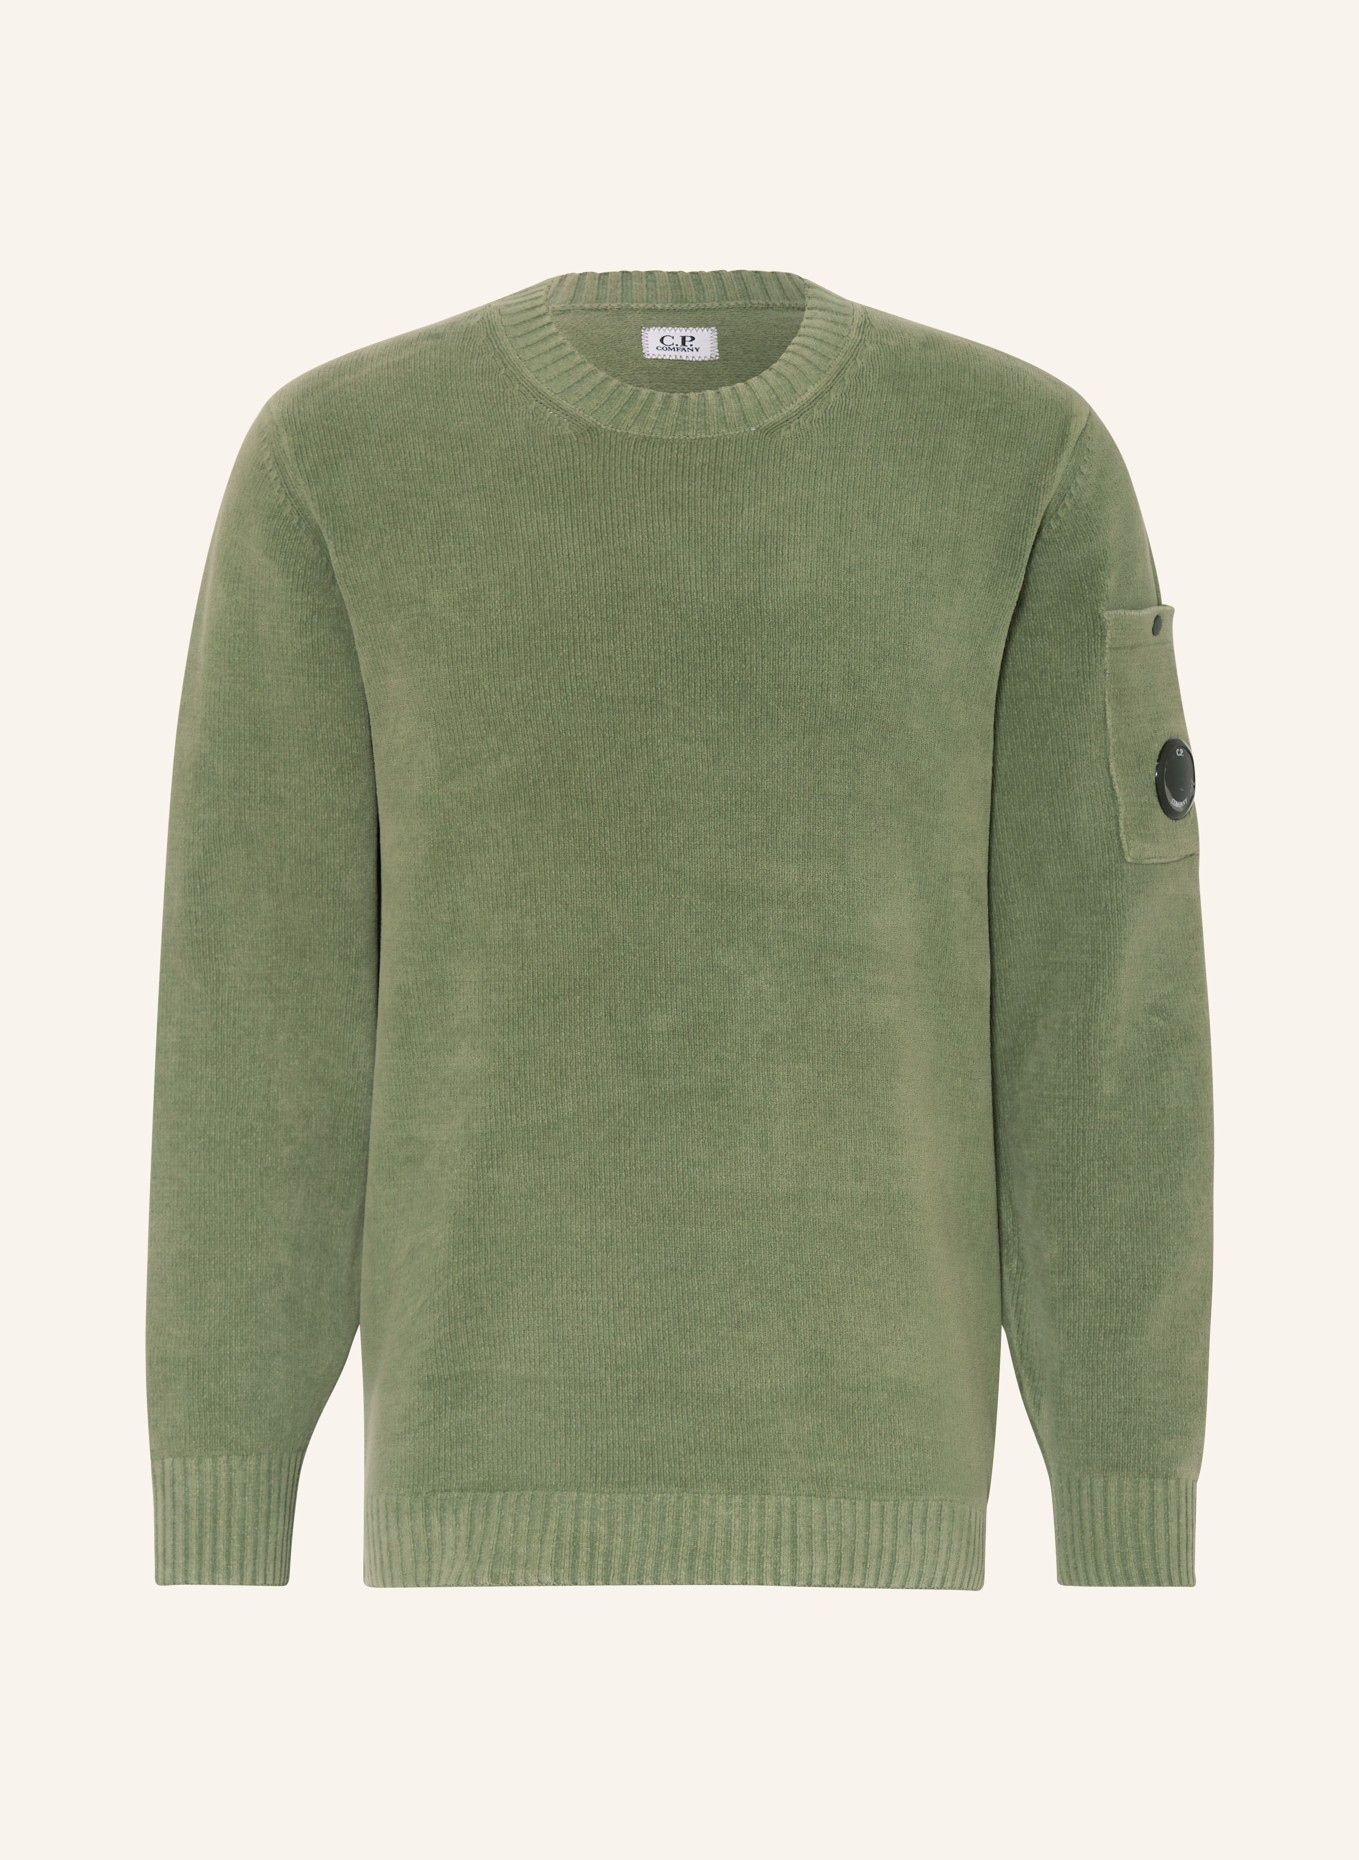 C.P. COMPANY Sweater, Color: OLIVE (Image 1)